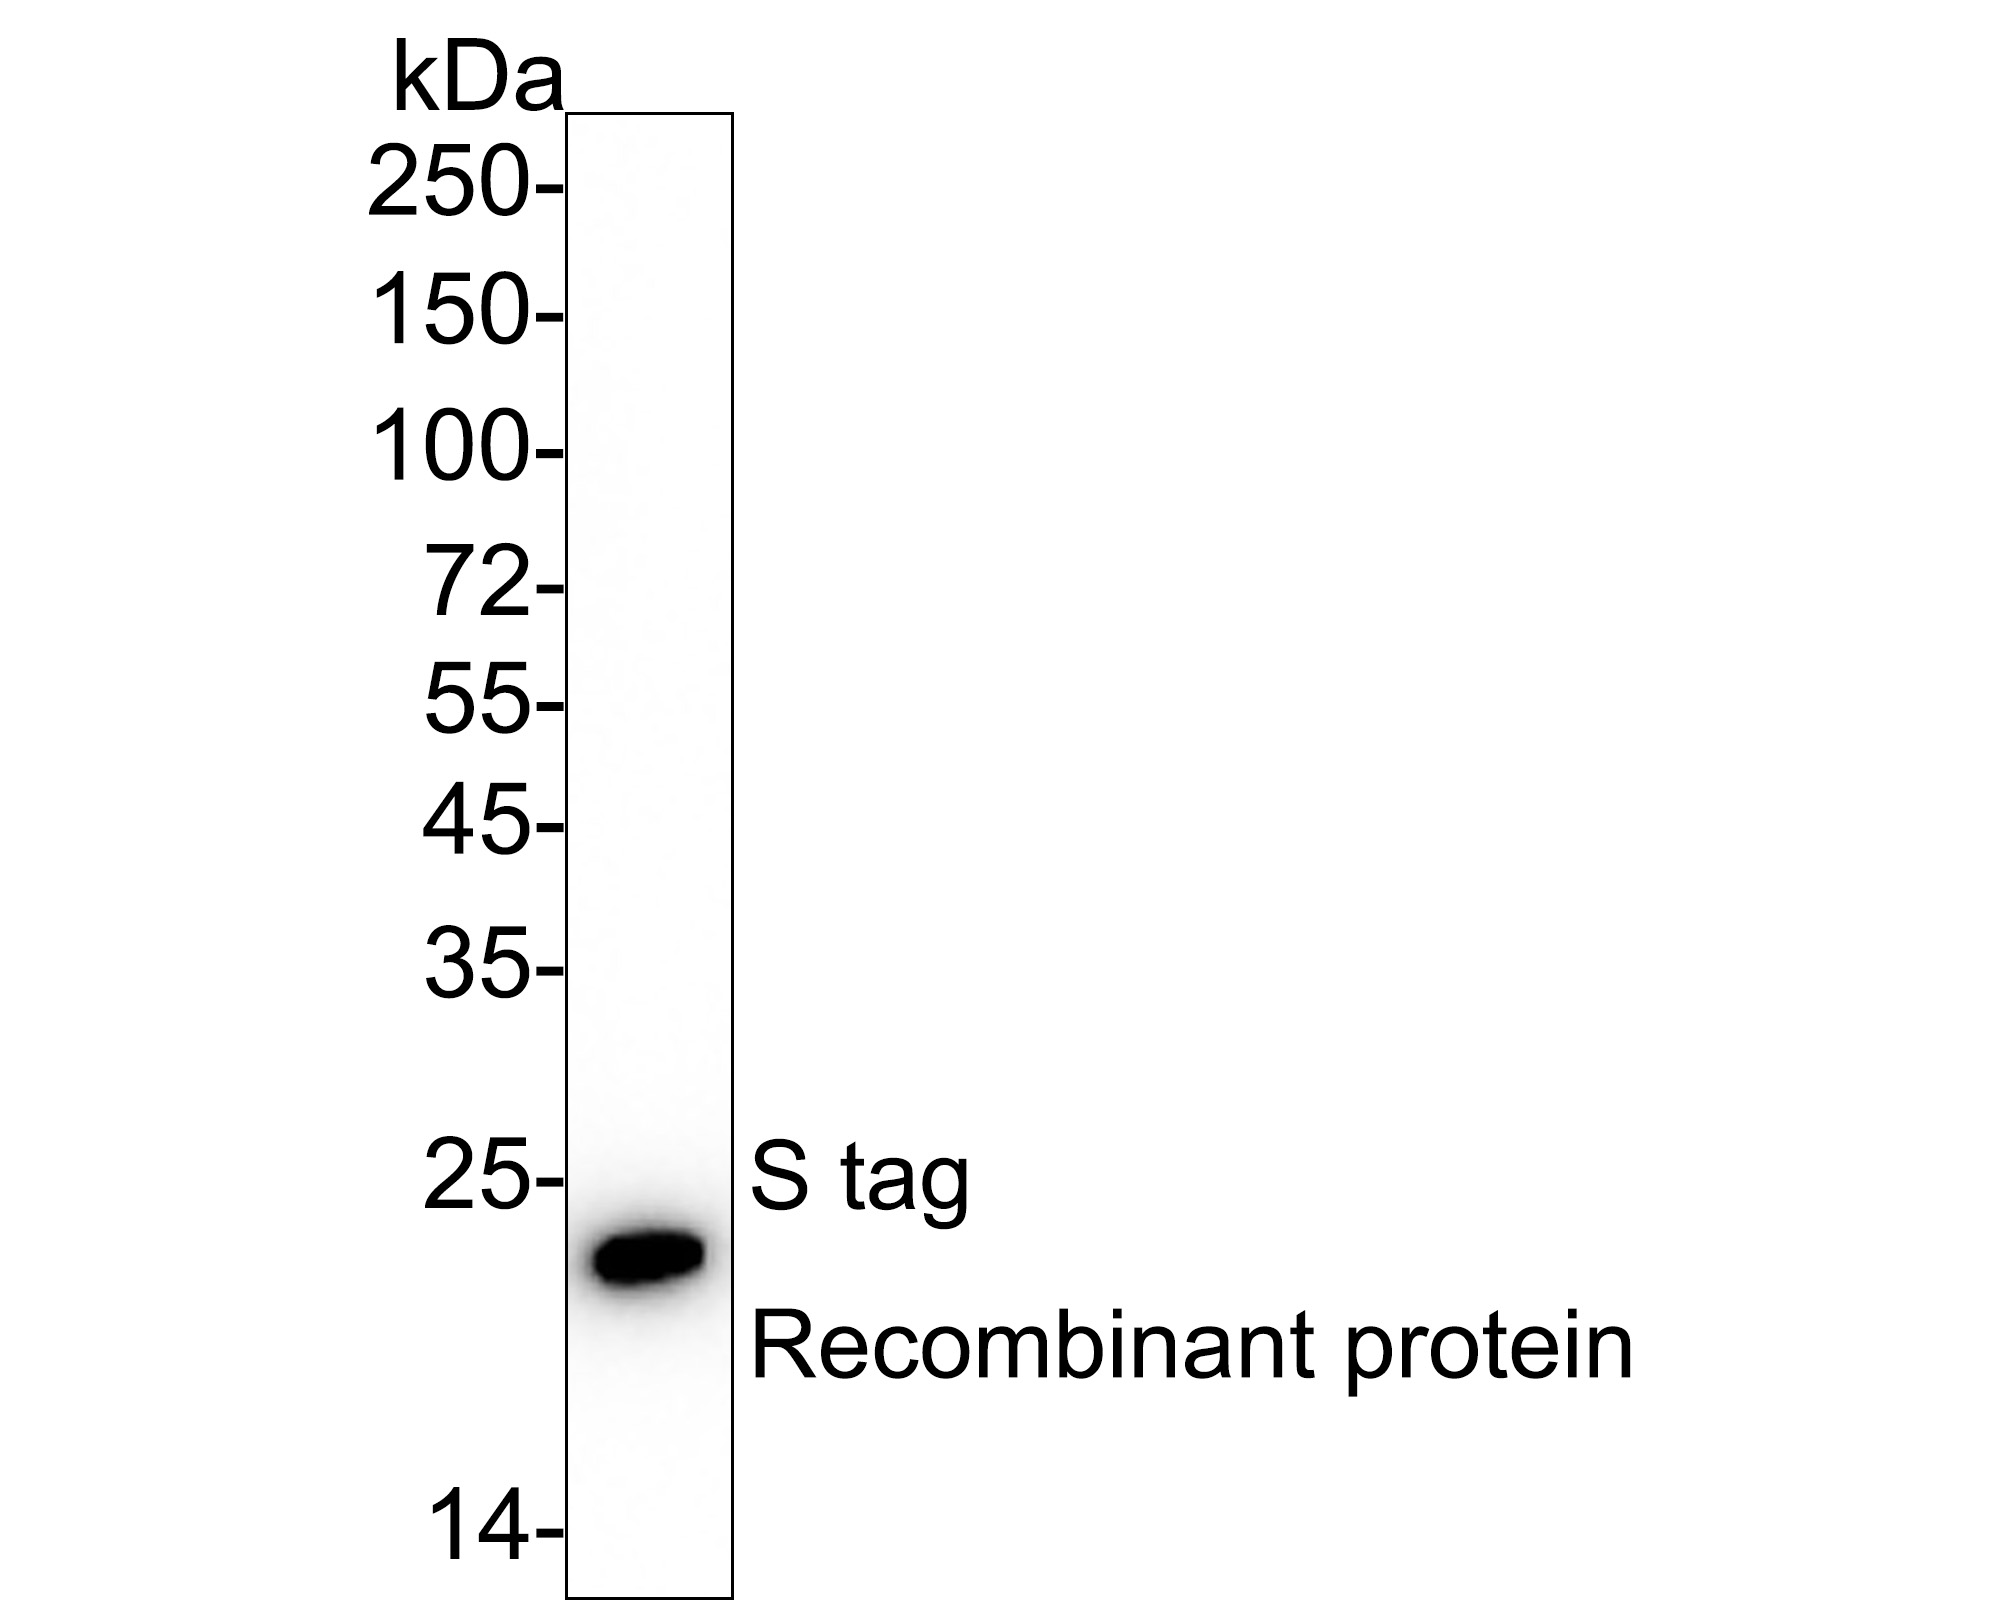 Western blot analysis of S tag on S-tagged recombinant protein using anti-S tag antibody at 1/5000 dilution.